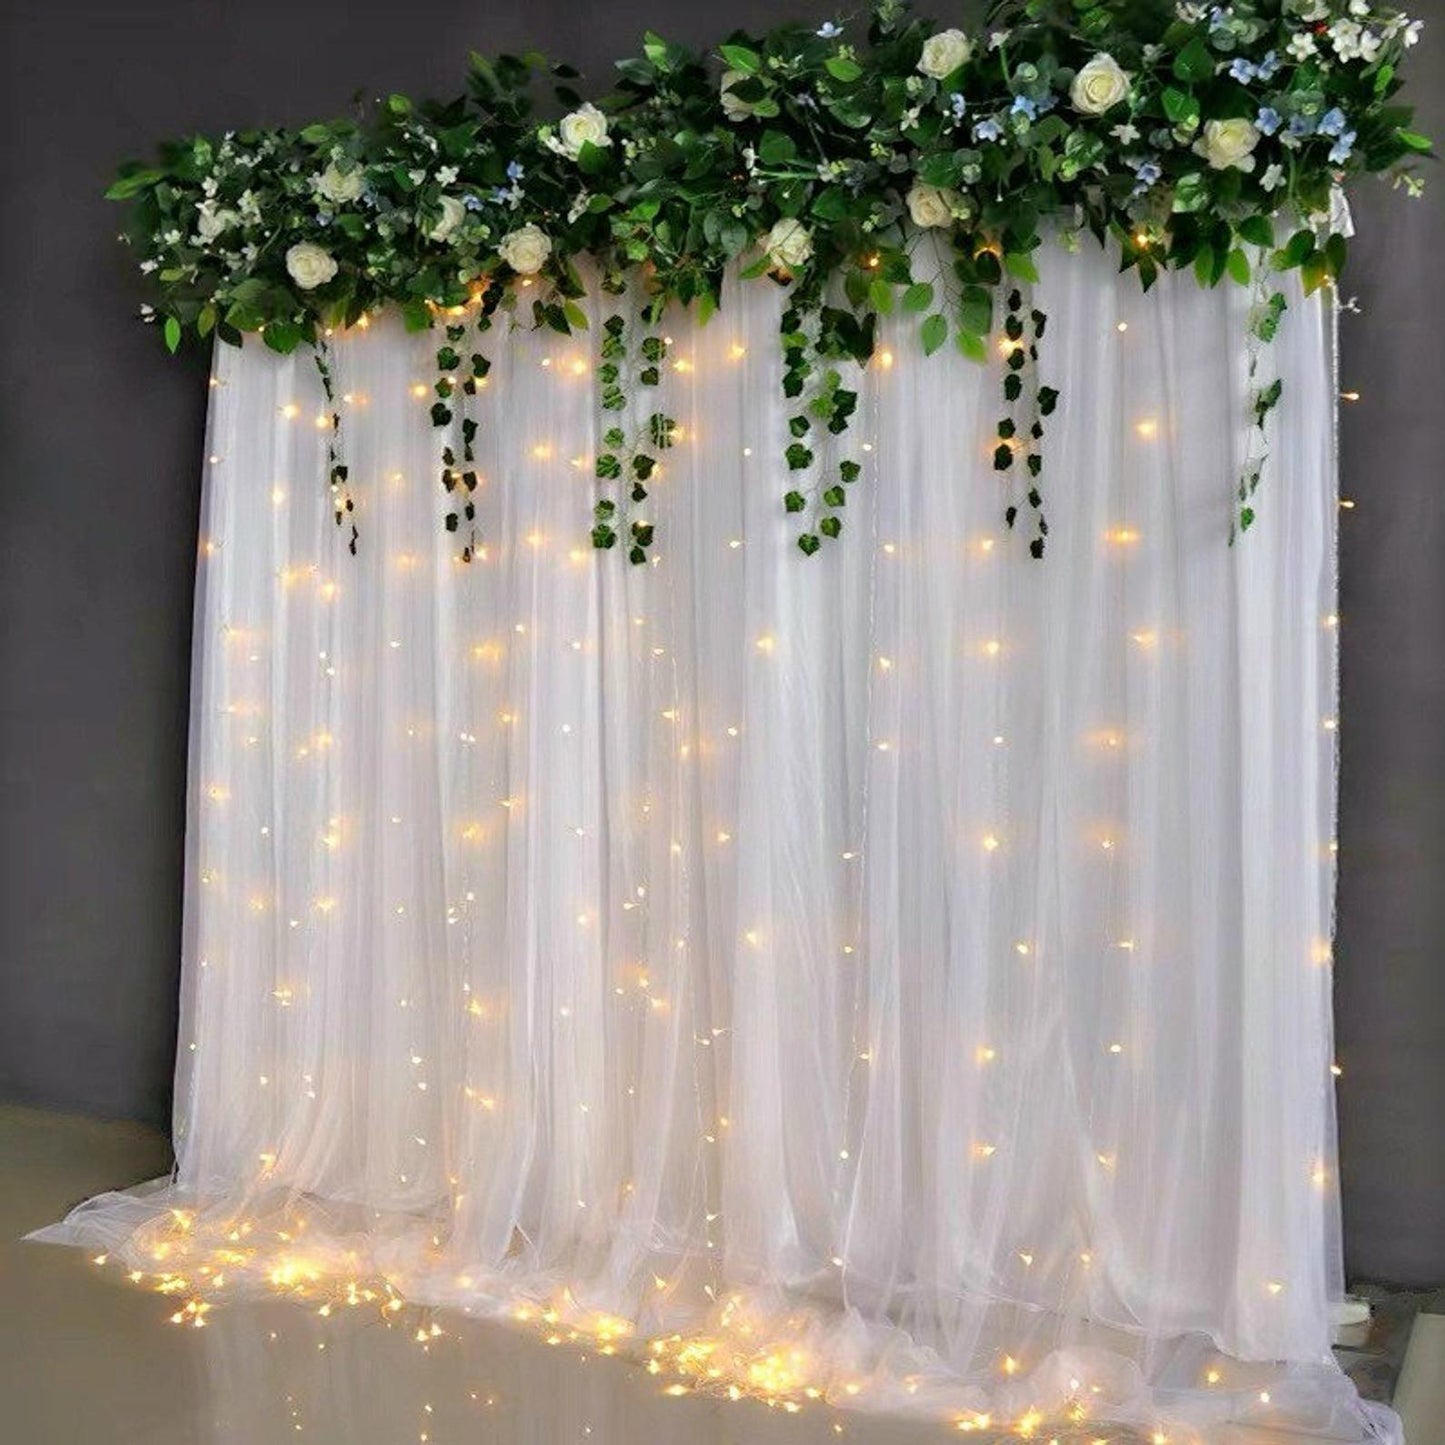 Window Curtain String Lights for Christmas Bedroom Party Wedding Home